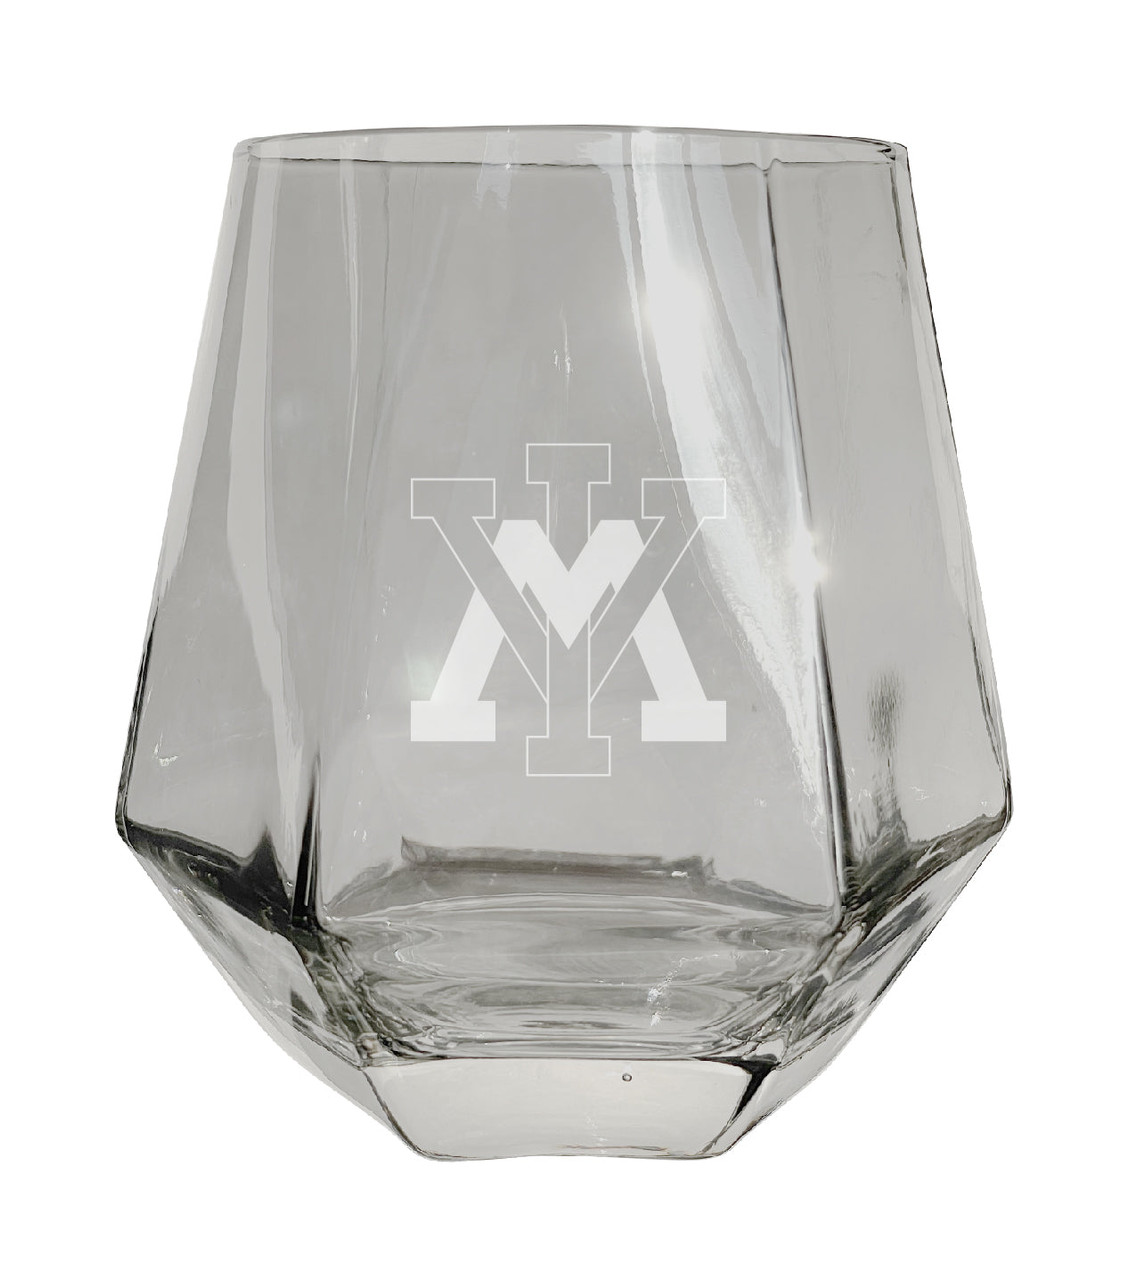 VMI Keydets Etched Diamond Cut Stemless 10 ounce Wine Glass Clear